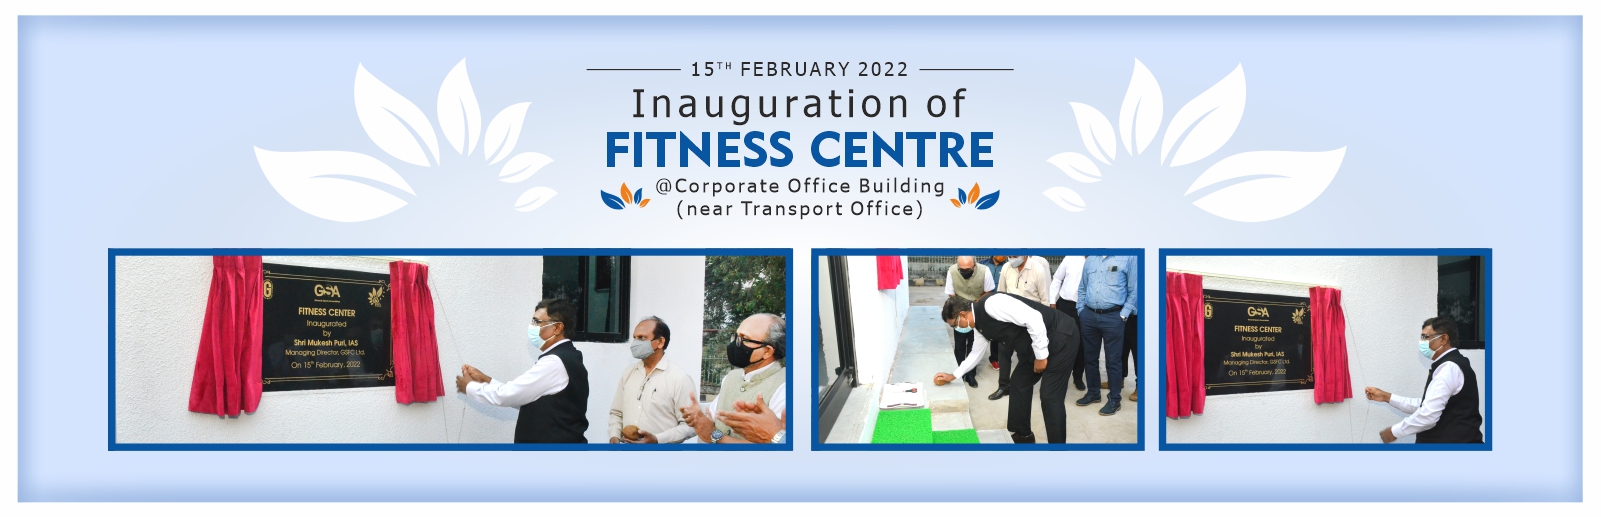 Inauguration of Fitness Centre